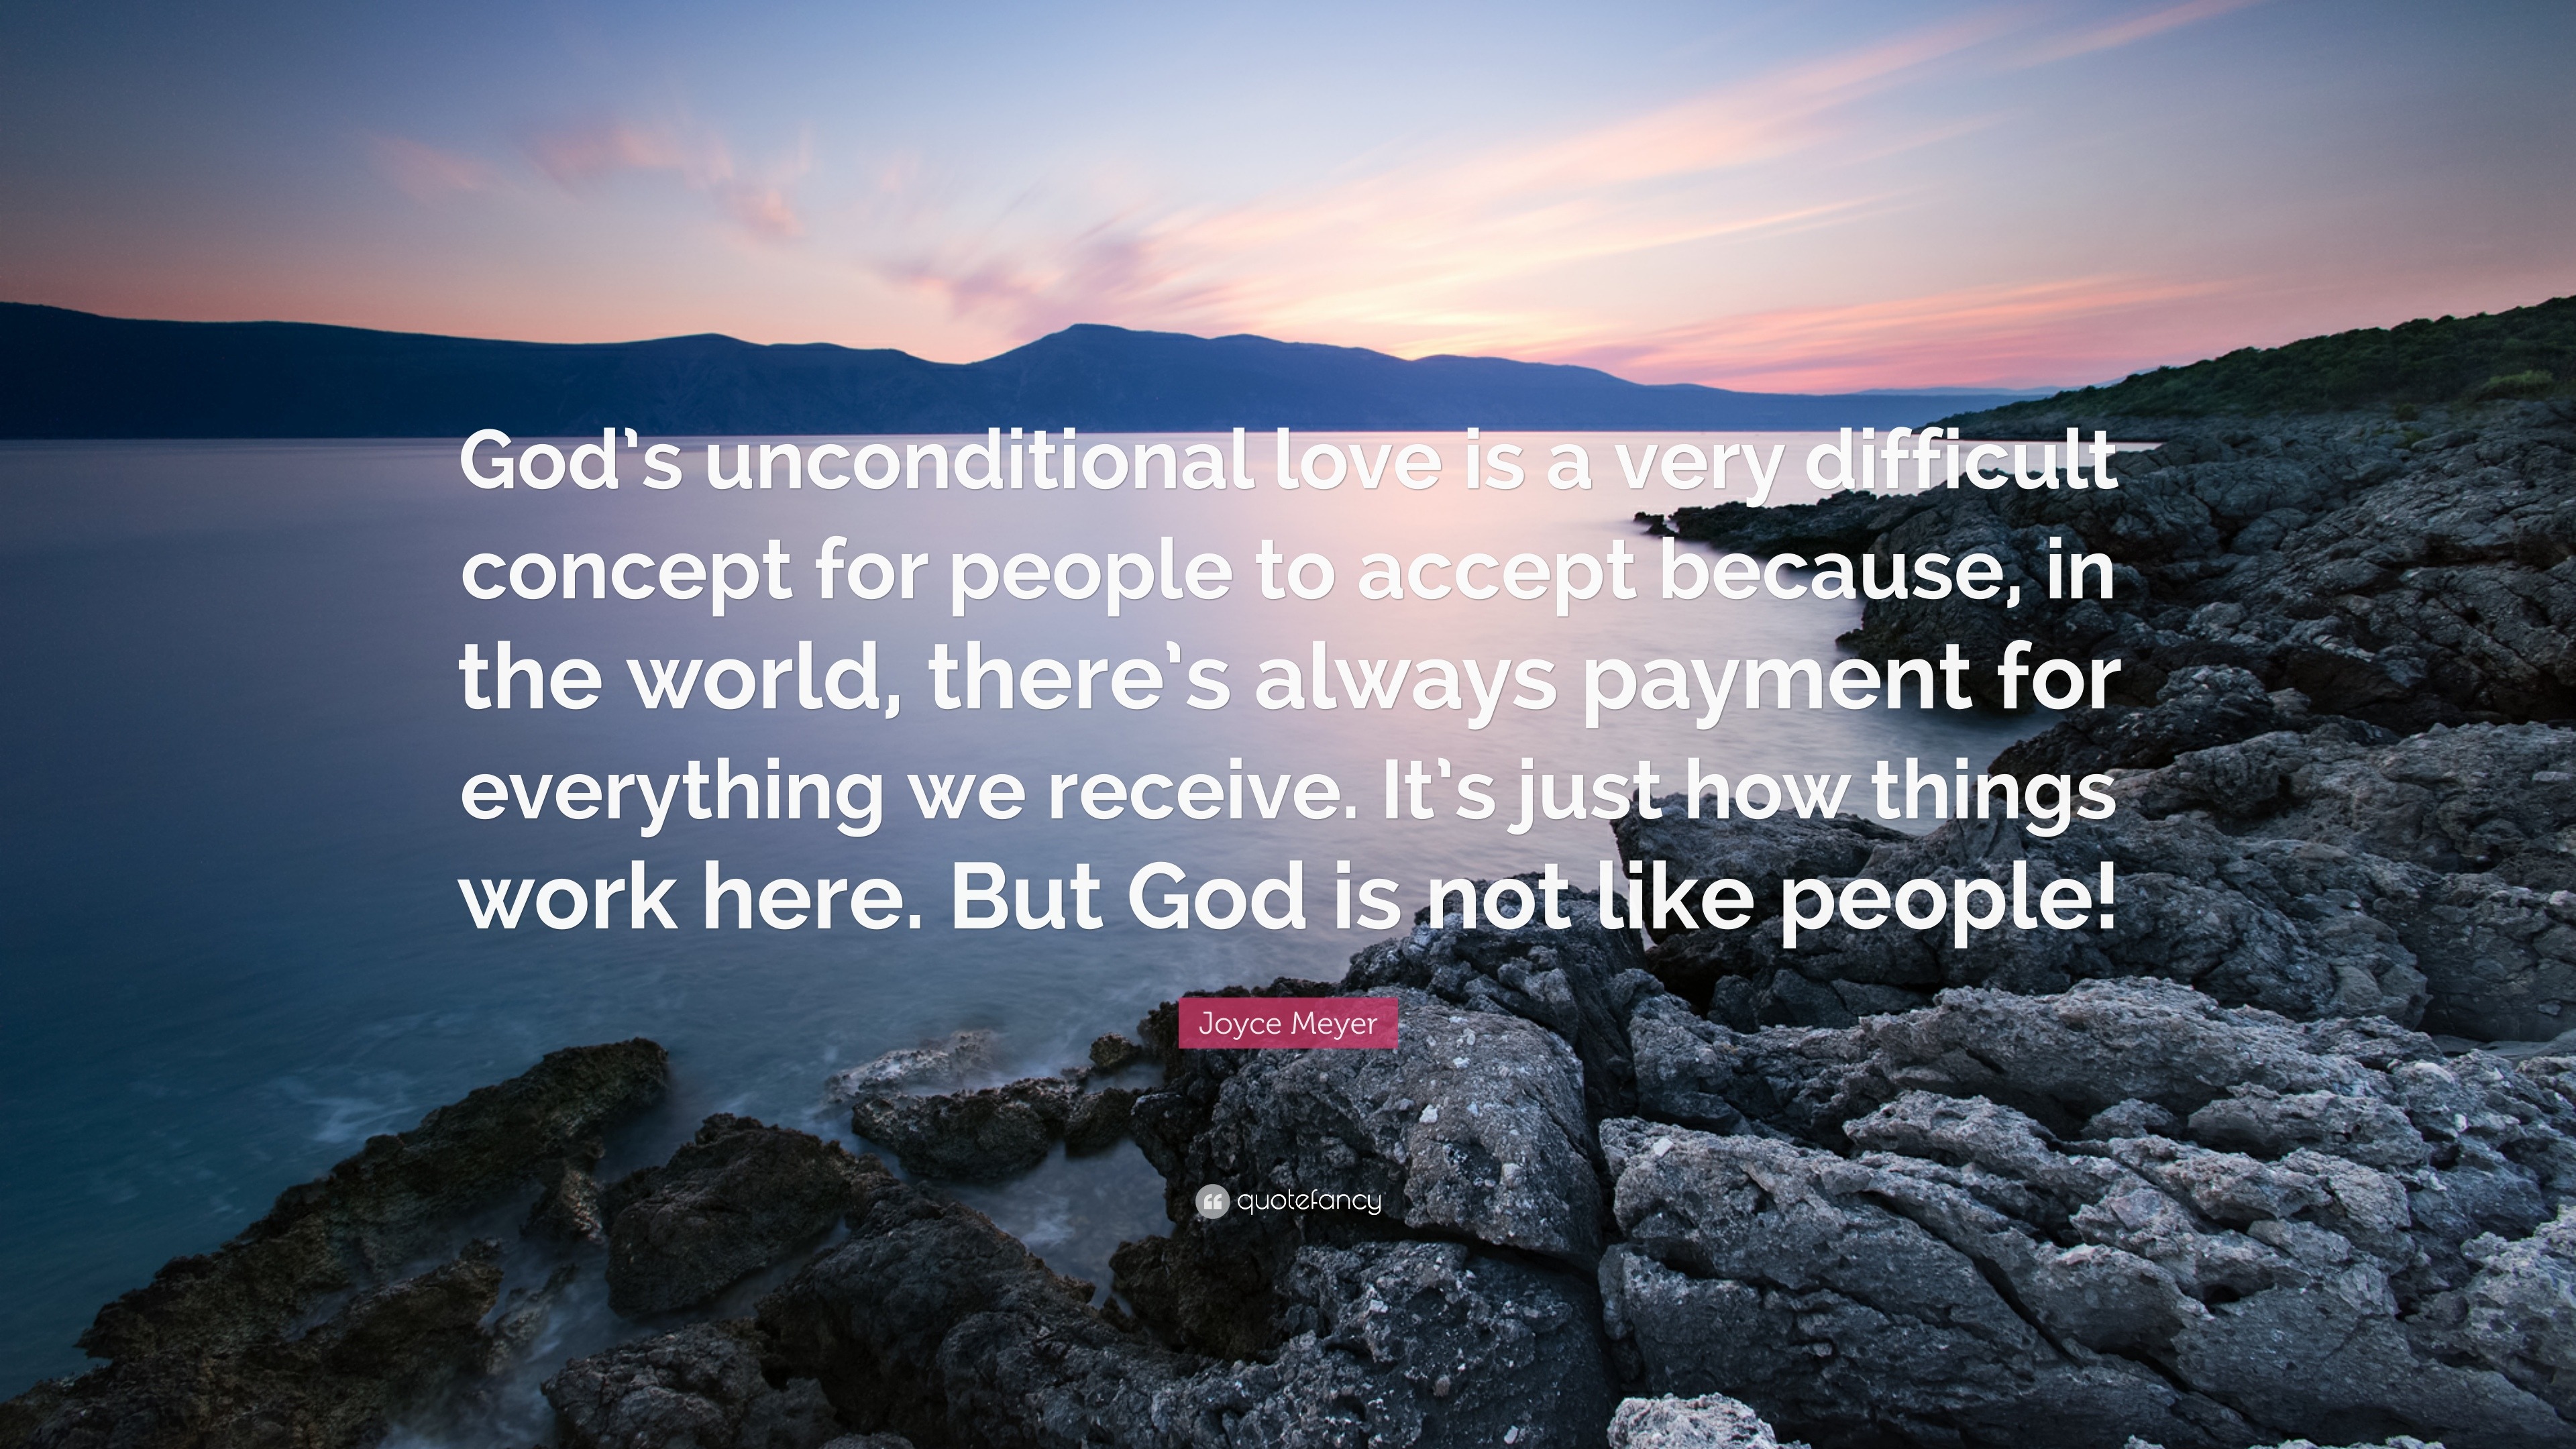 Joyce Meyer Quote “God s unconditional love is a very difficult concept for people to